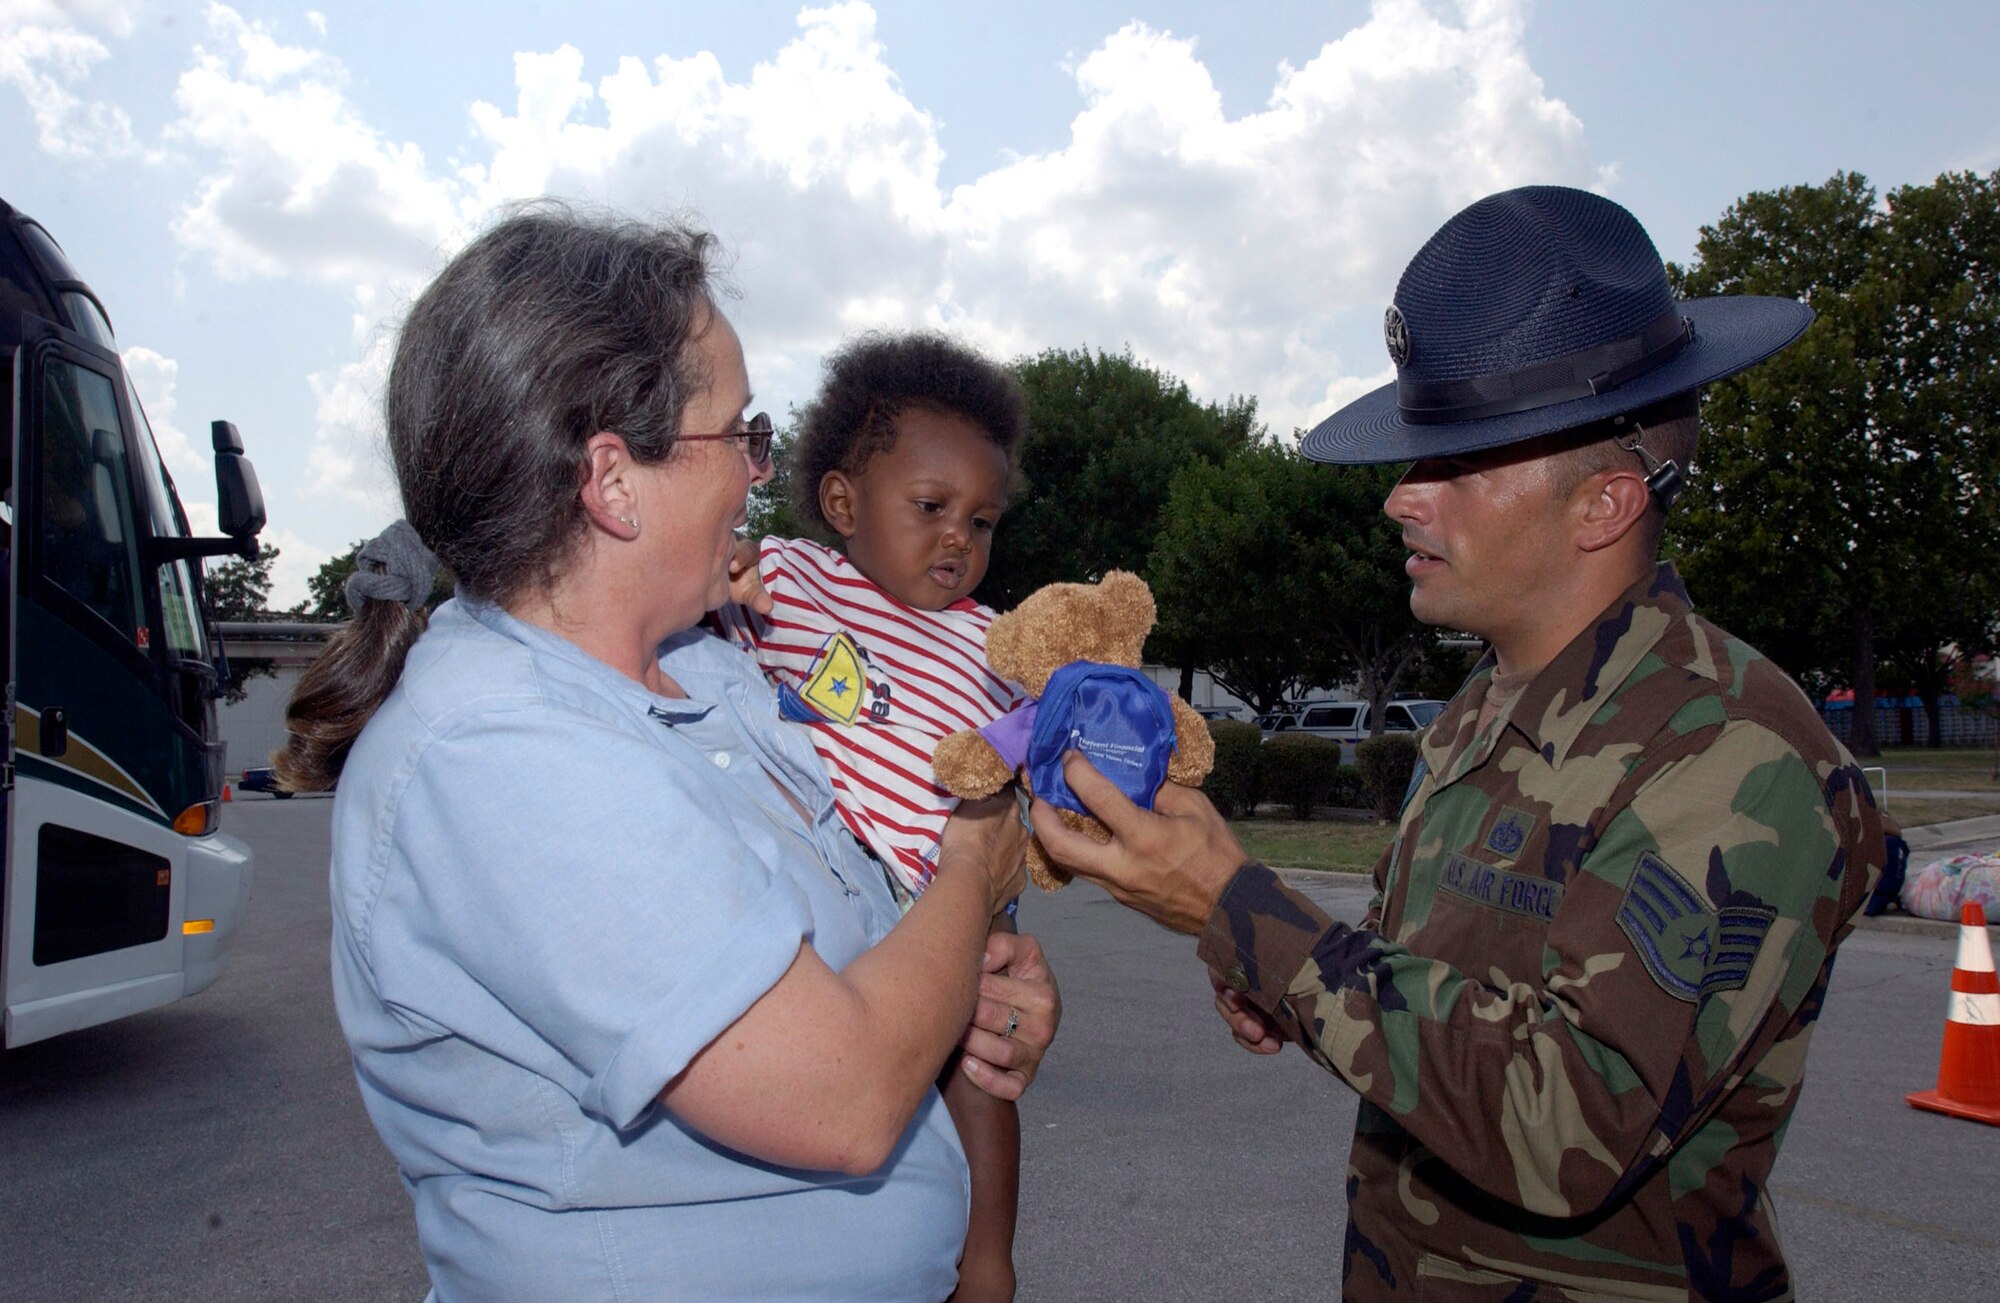 SAN ANTONIO -- Staff Sgt. Chris Clark, gives tiny evacuee Antonio Michaels a stuffed animal as he arrived here.  The evacuees arrived Sept. 2 from New Orleans. They are being inprocessed, given a medical checkup, fed and put into temporary shelters. Sergeant Clark is a technical instructor with the 737th Training Squadron at nearby Lackland Air Force Base, Texas.  (U.S. Air Force photo by Tech. Sgt. Mark Borosch)